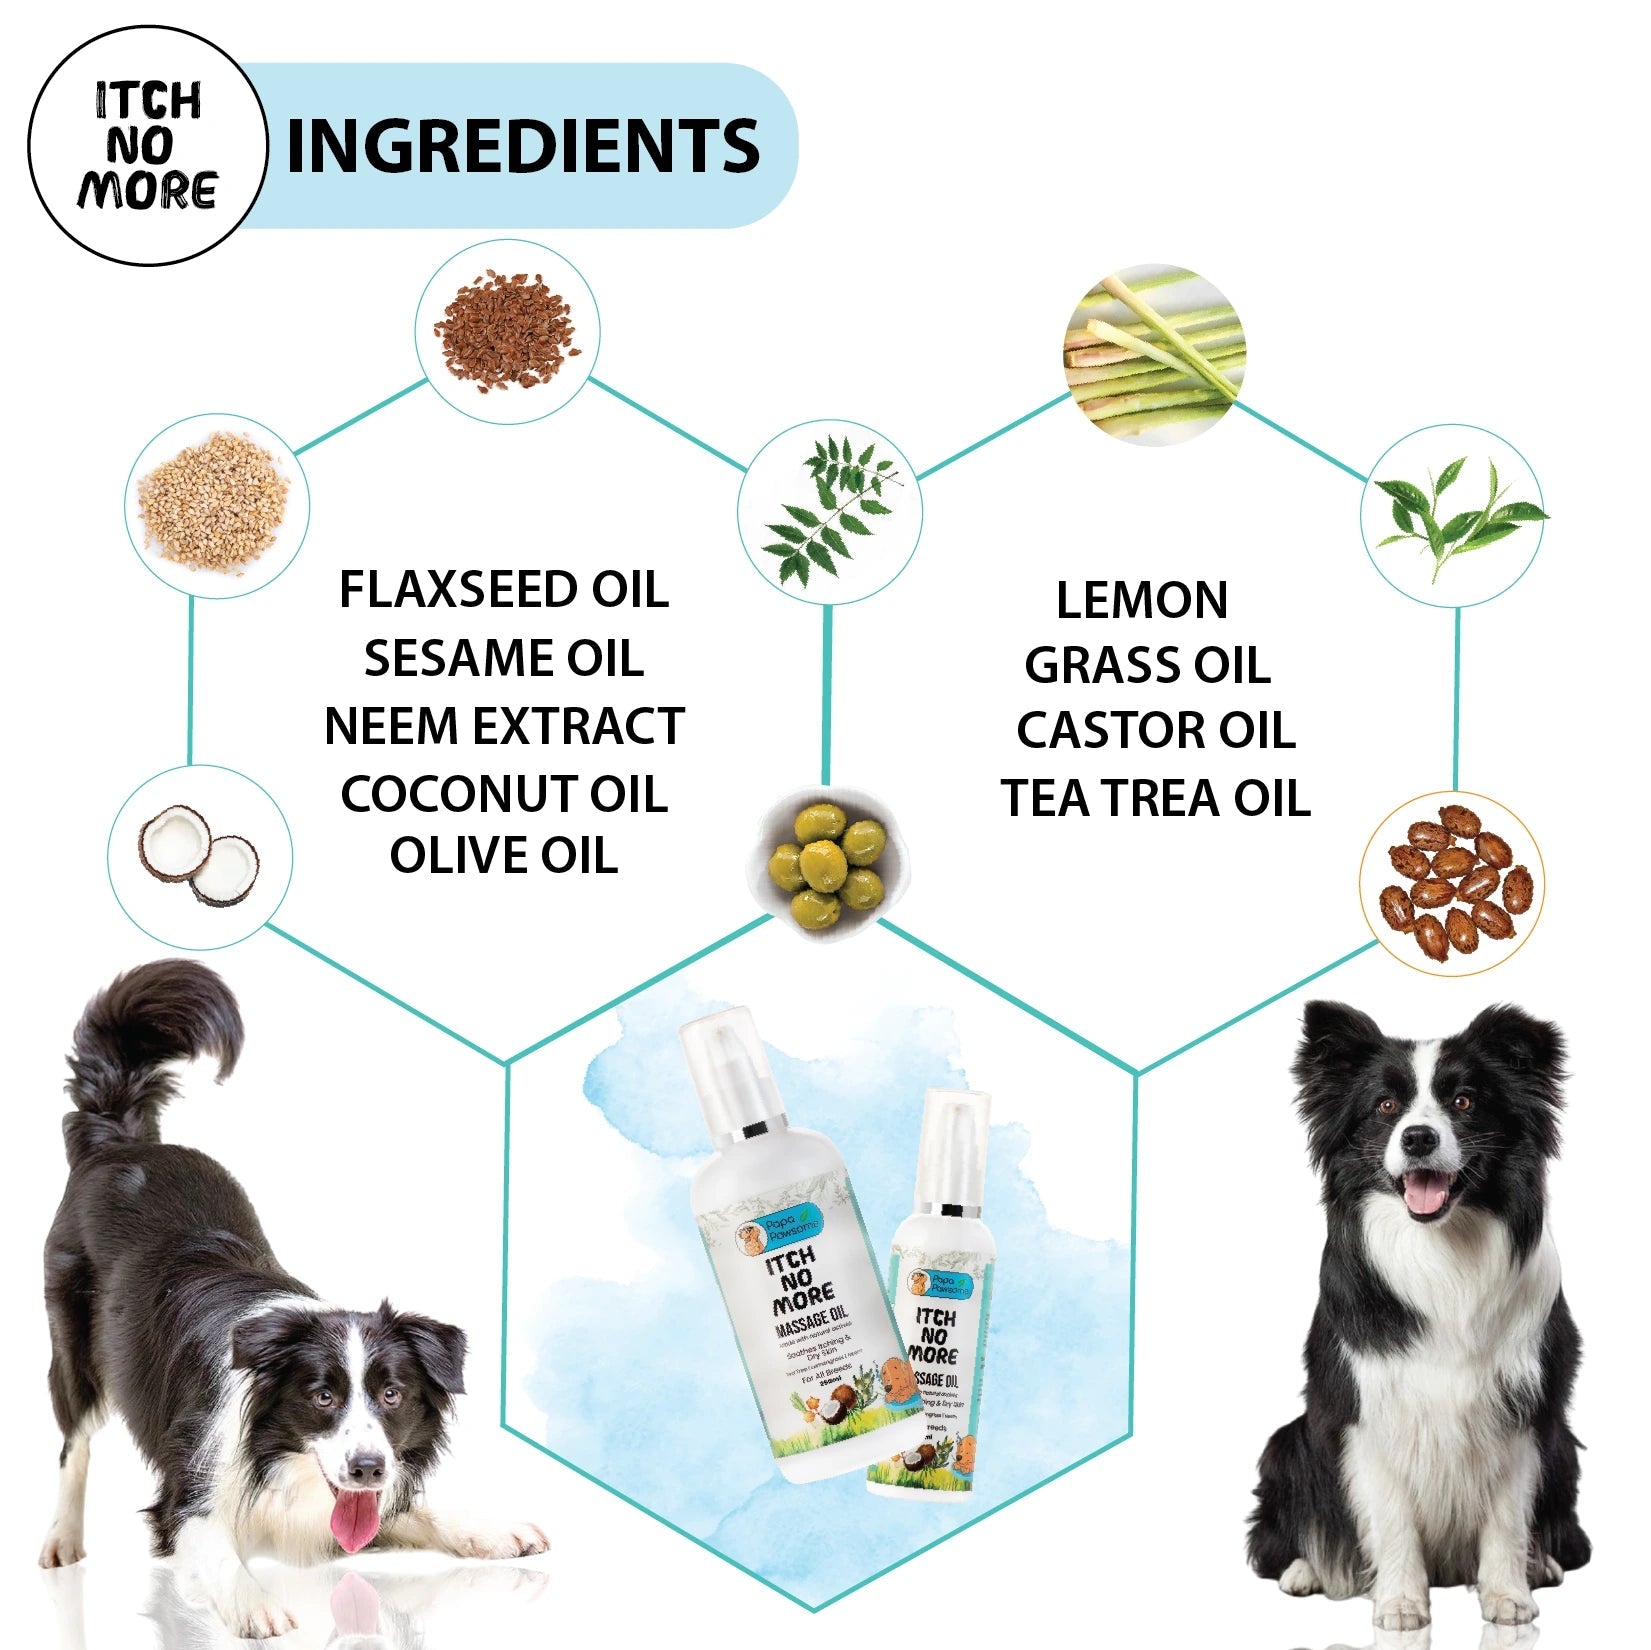 Close-up of pet oil ingredients: Flaxseed Oil, Neem Supercritical Extracts, Olive Oil, Sesame Oil, Castor Oil, Coconut Oil, Tea Tree Essential Oil, Lemongrass Essential Oil.